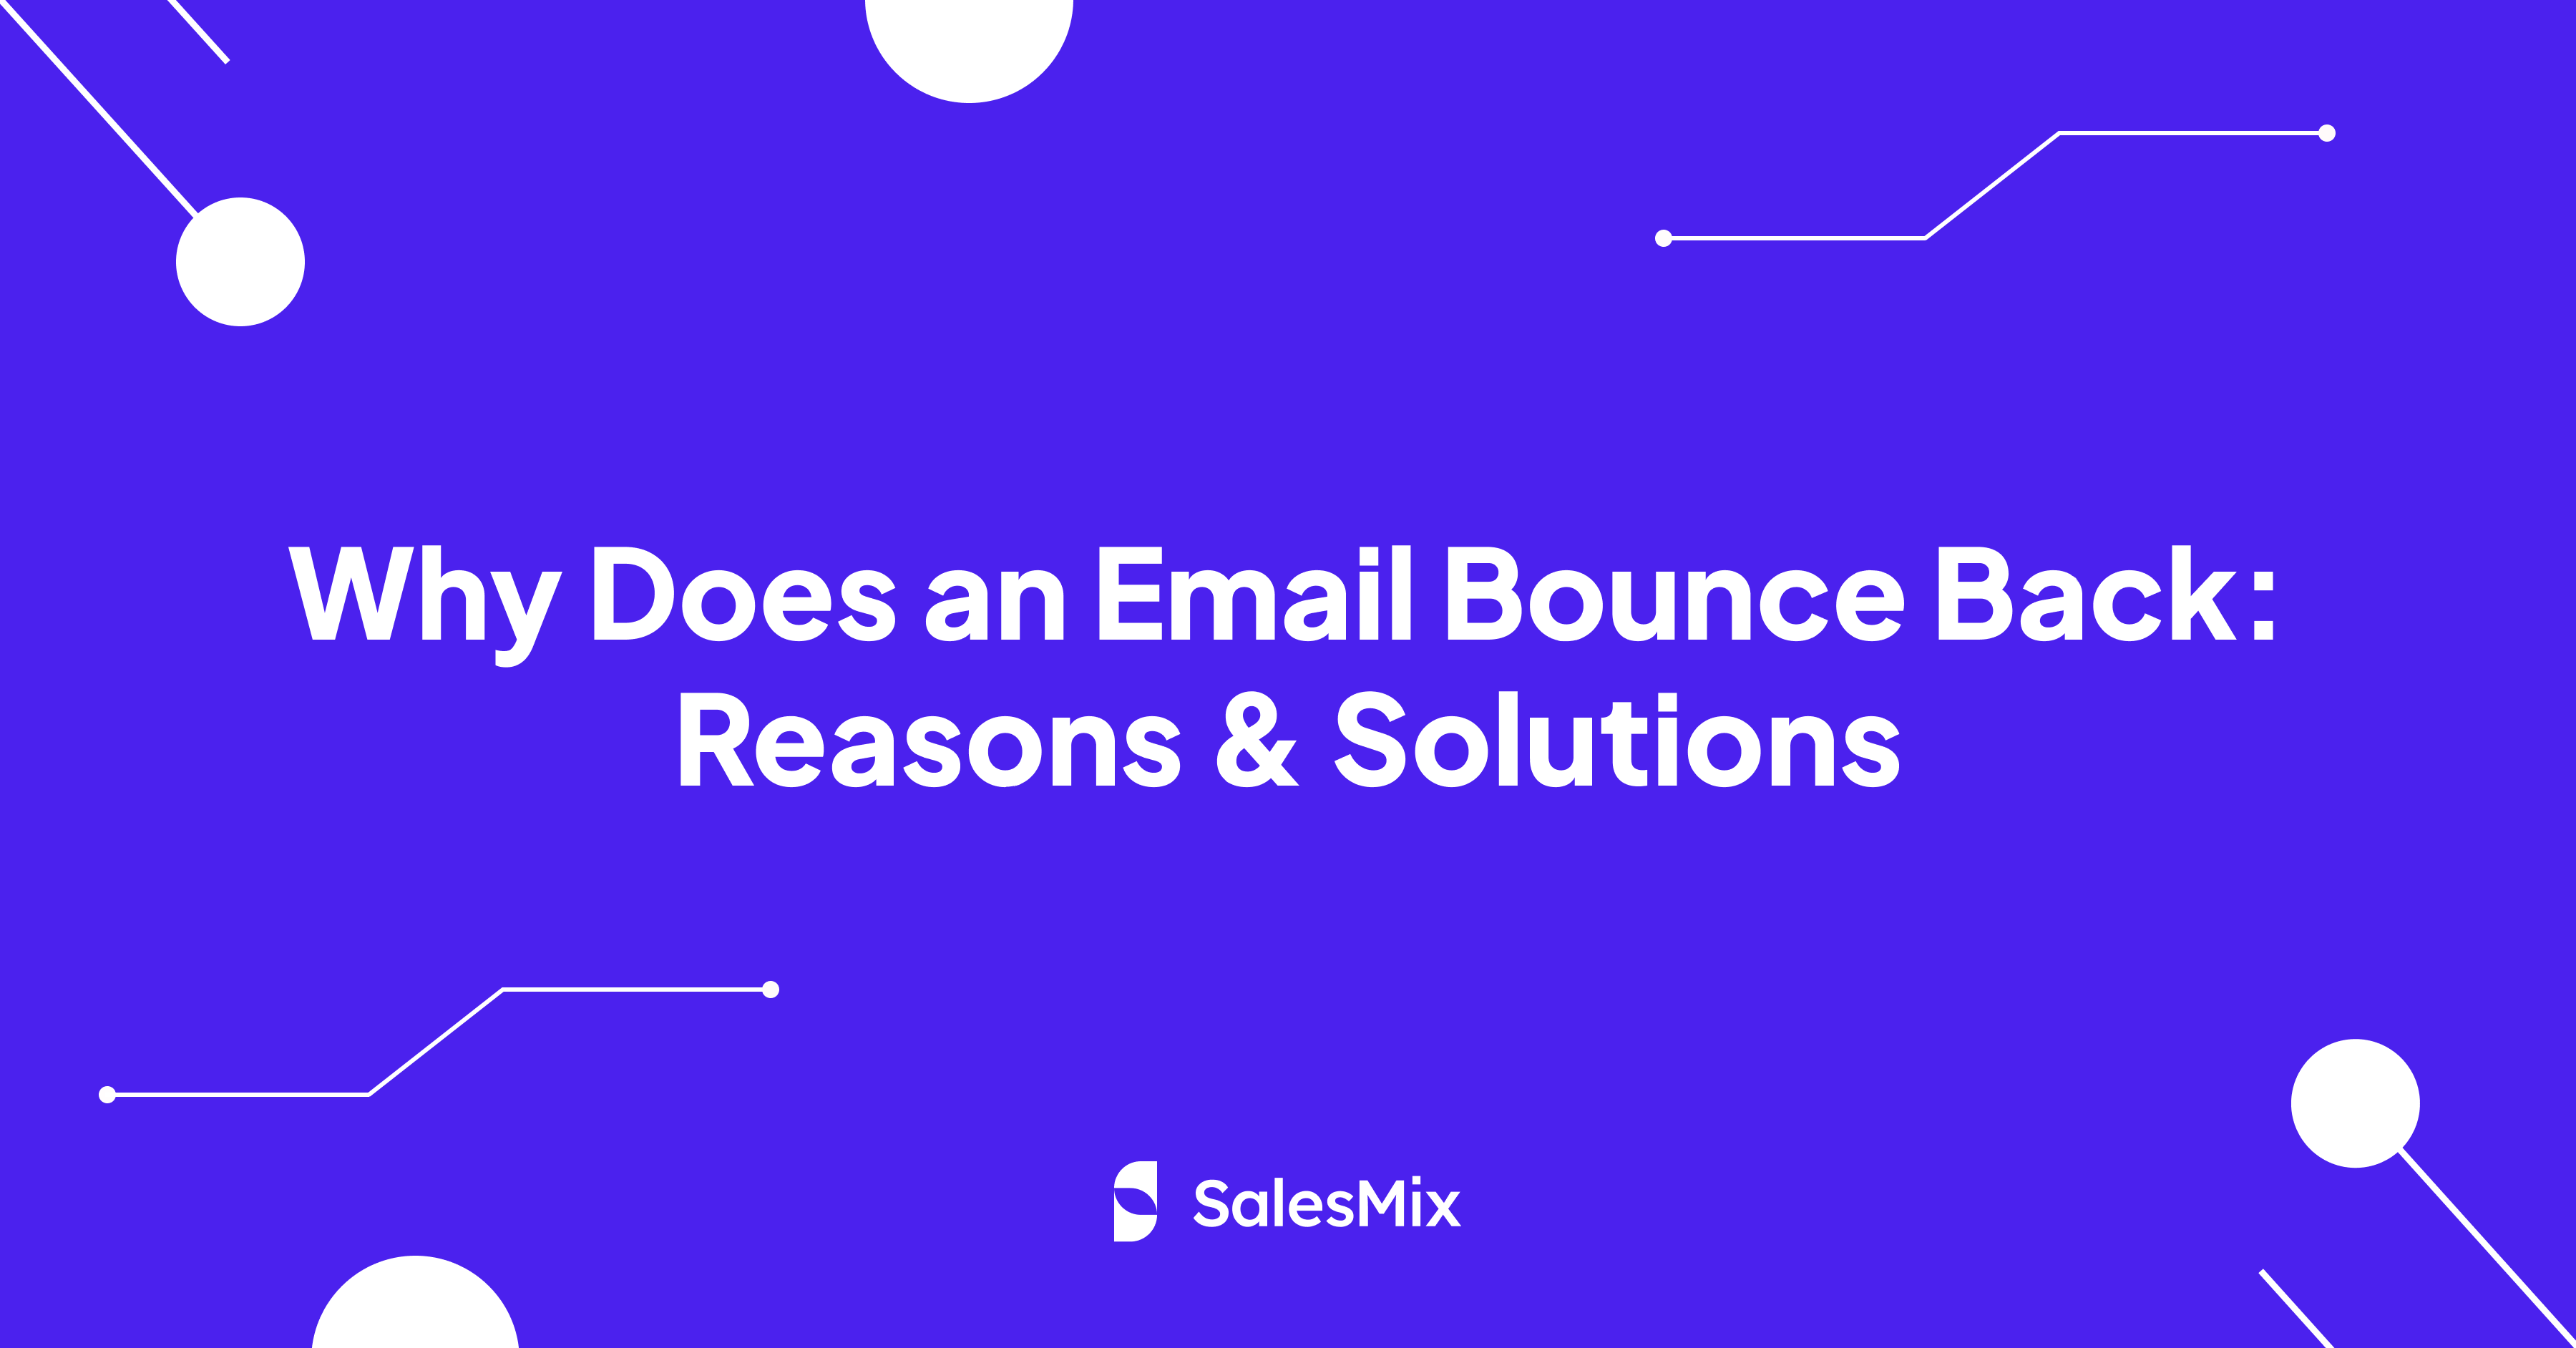 email-bounce-back-features image